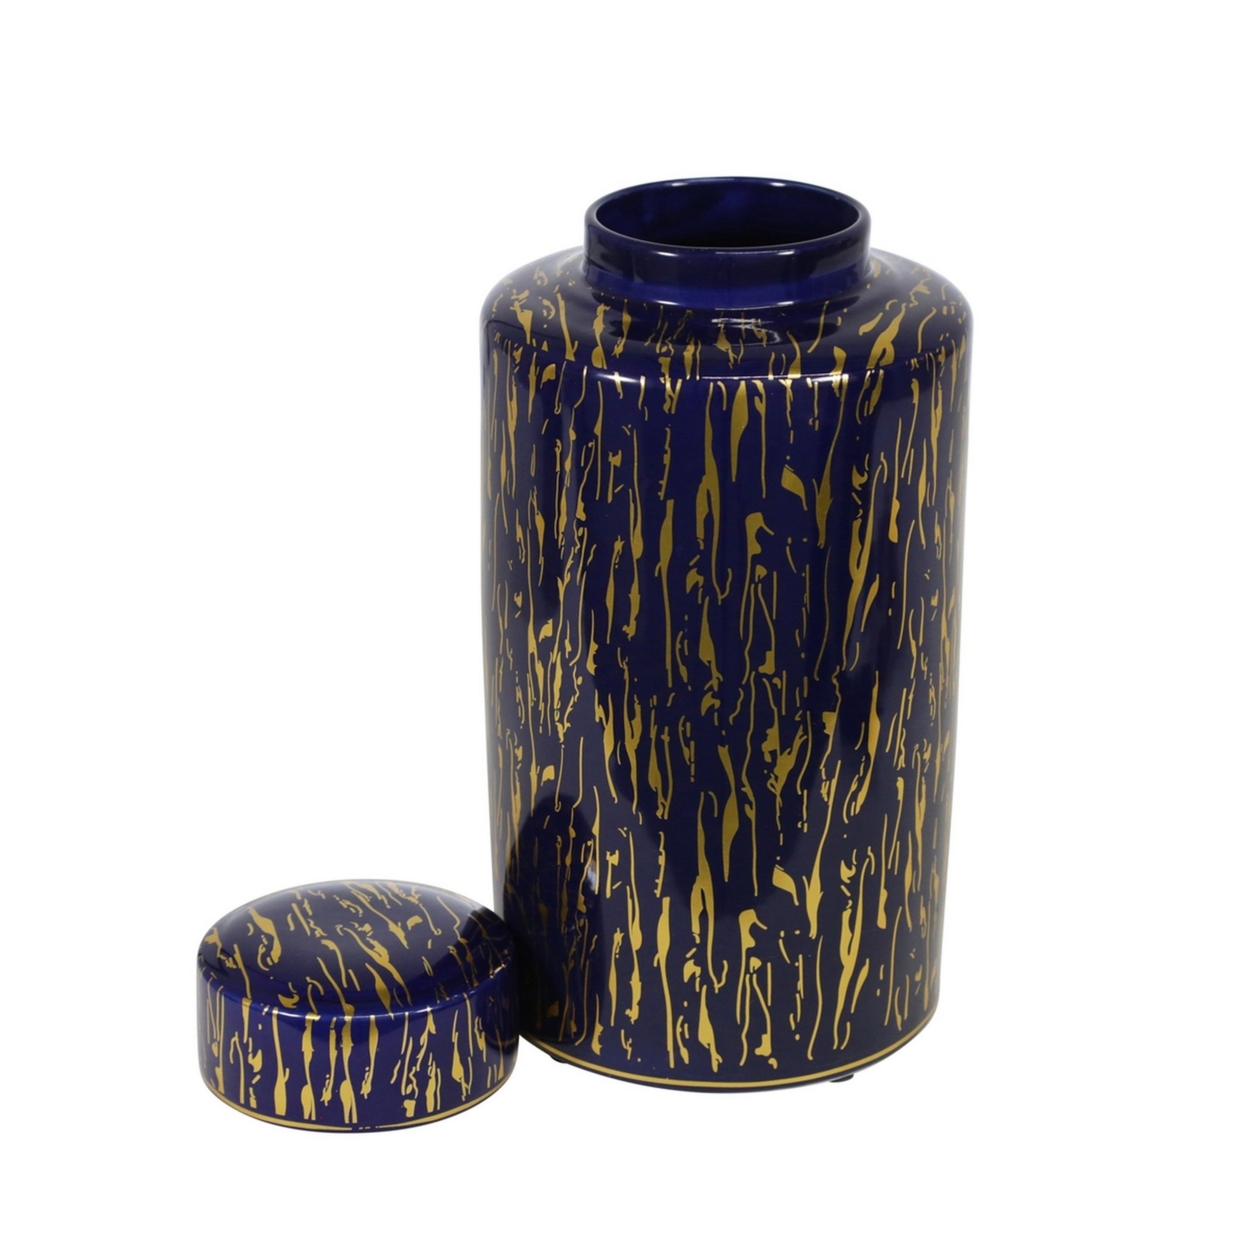 Jar With Lid Closure And Abstract Line Pattern, Gold- Saltoro Sherpi